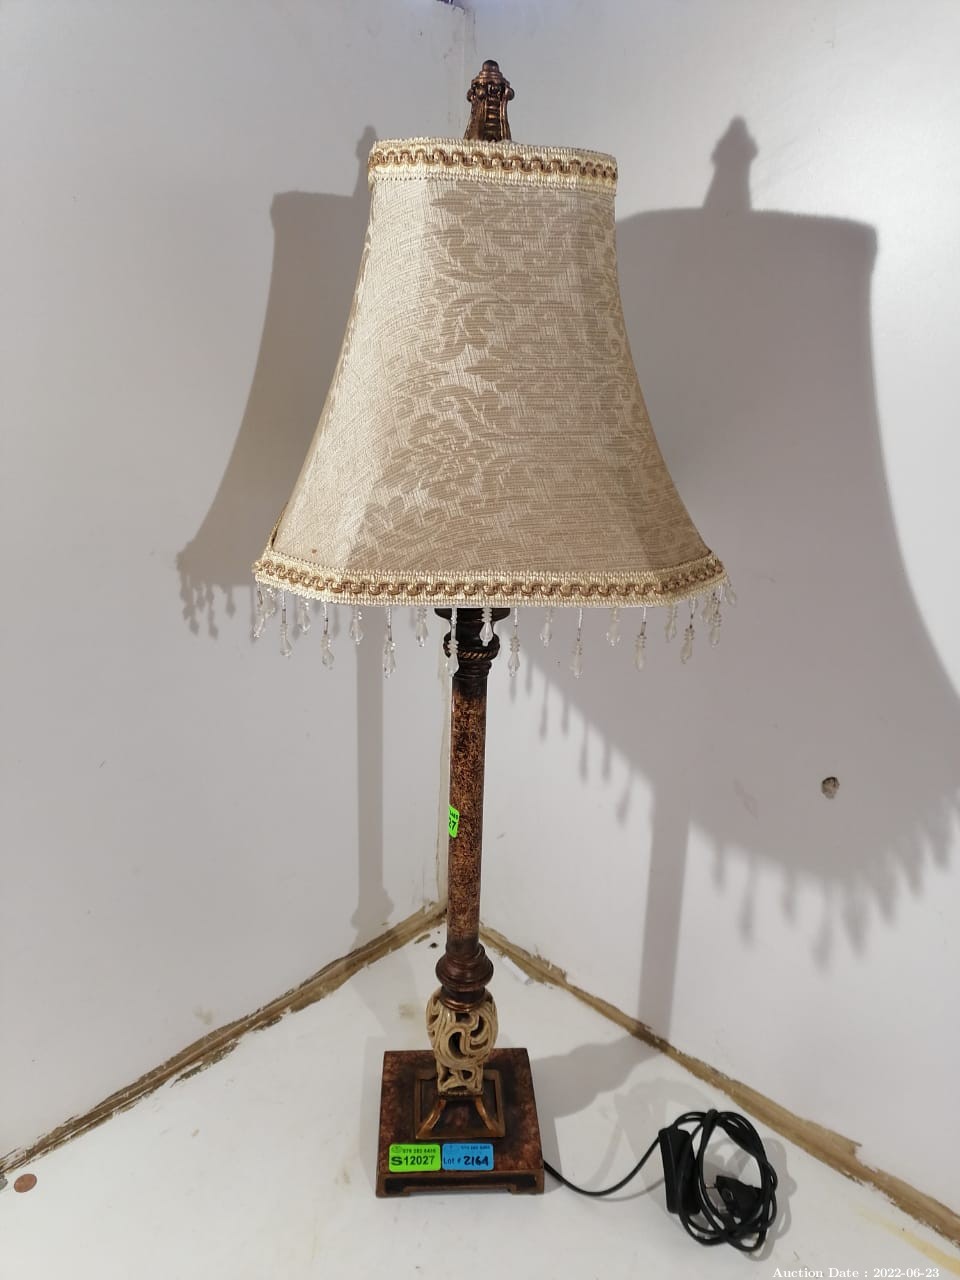 2164 - Side Table Lamp, unusual detailing with lampshade